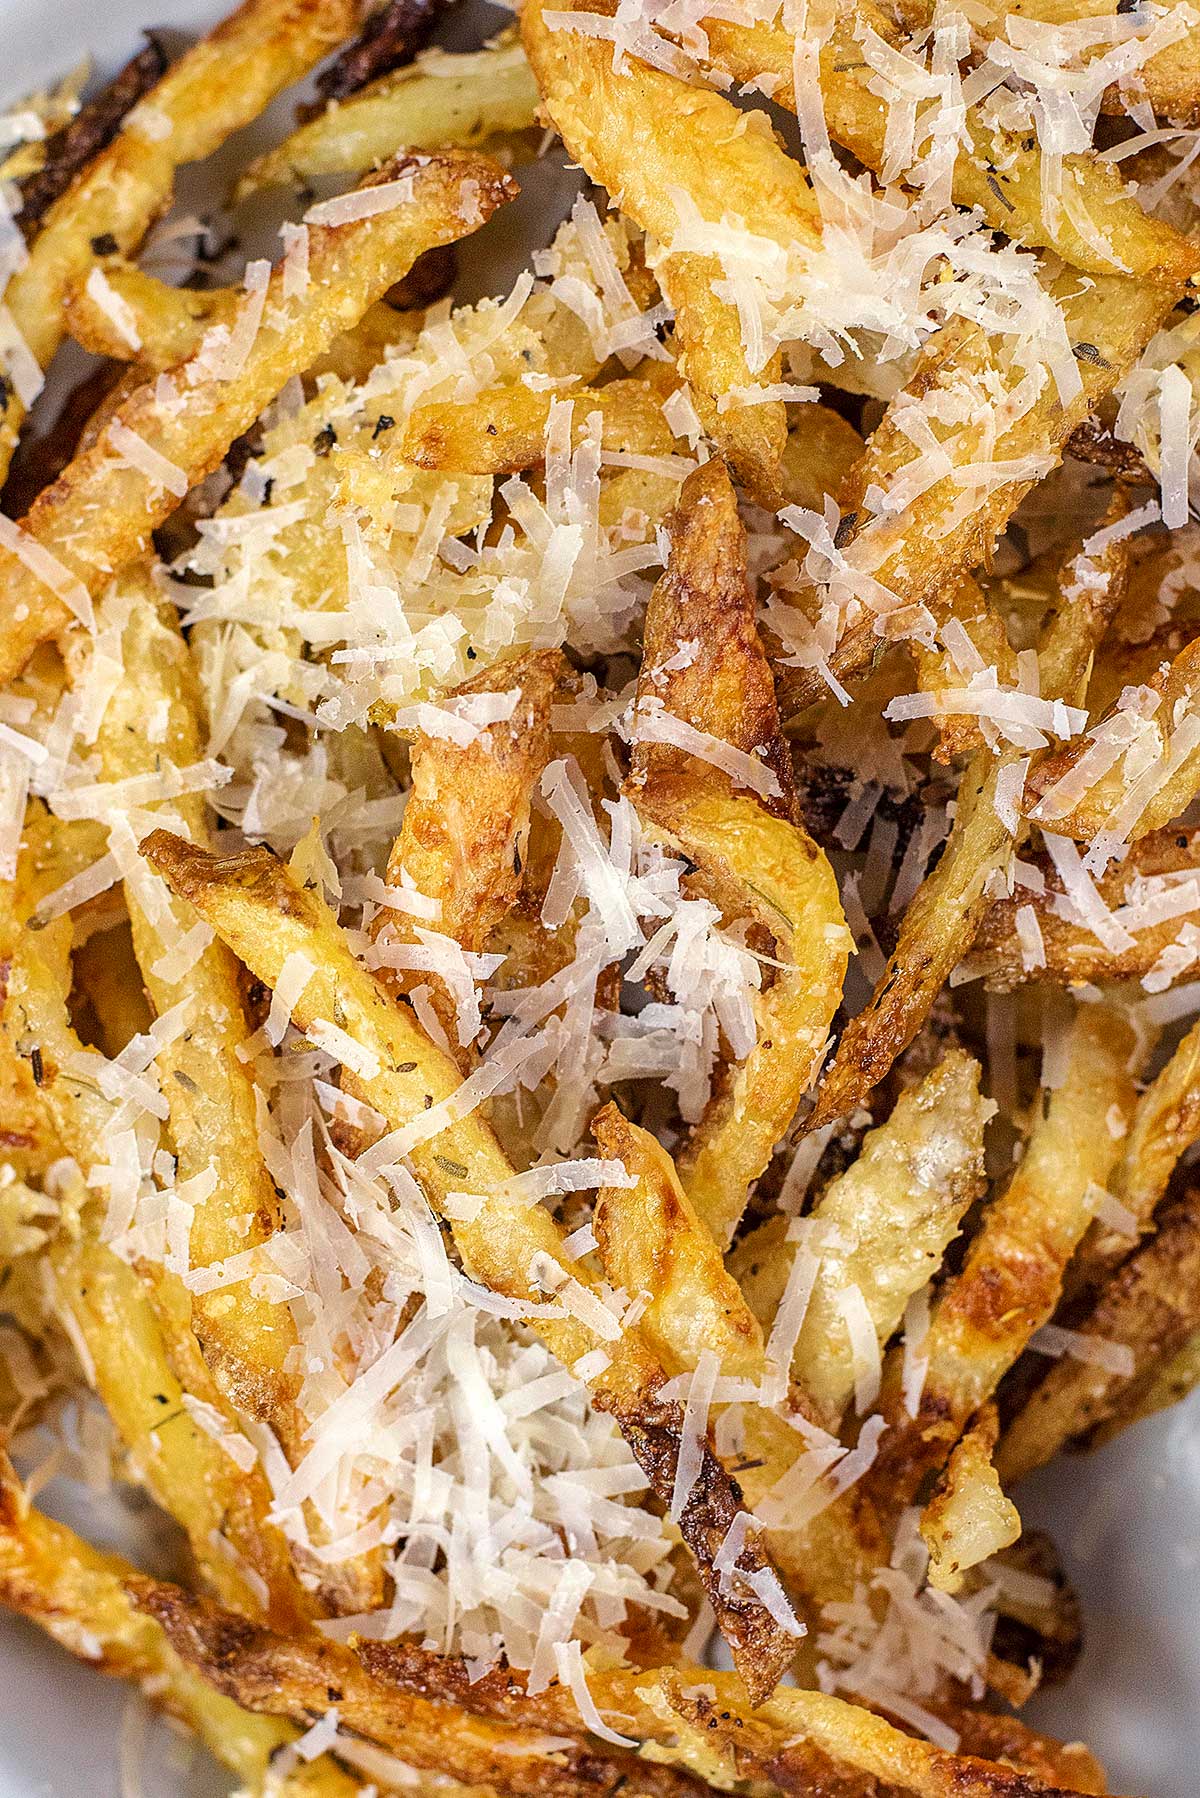 Cooked fries covered in grated Parmesan.